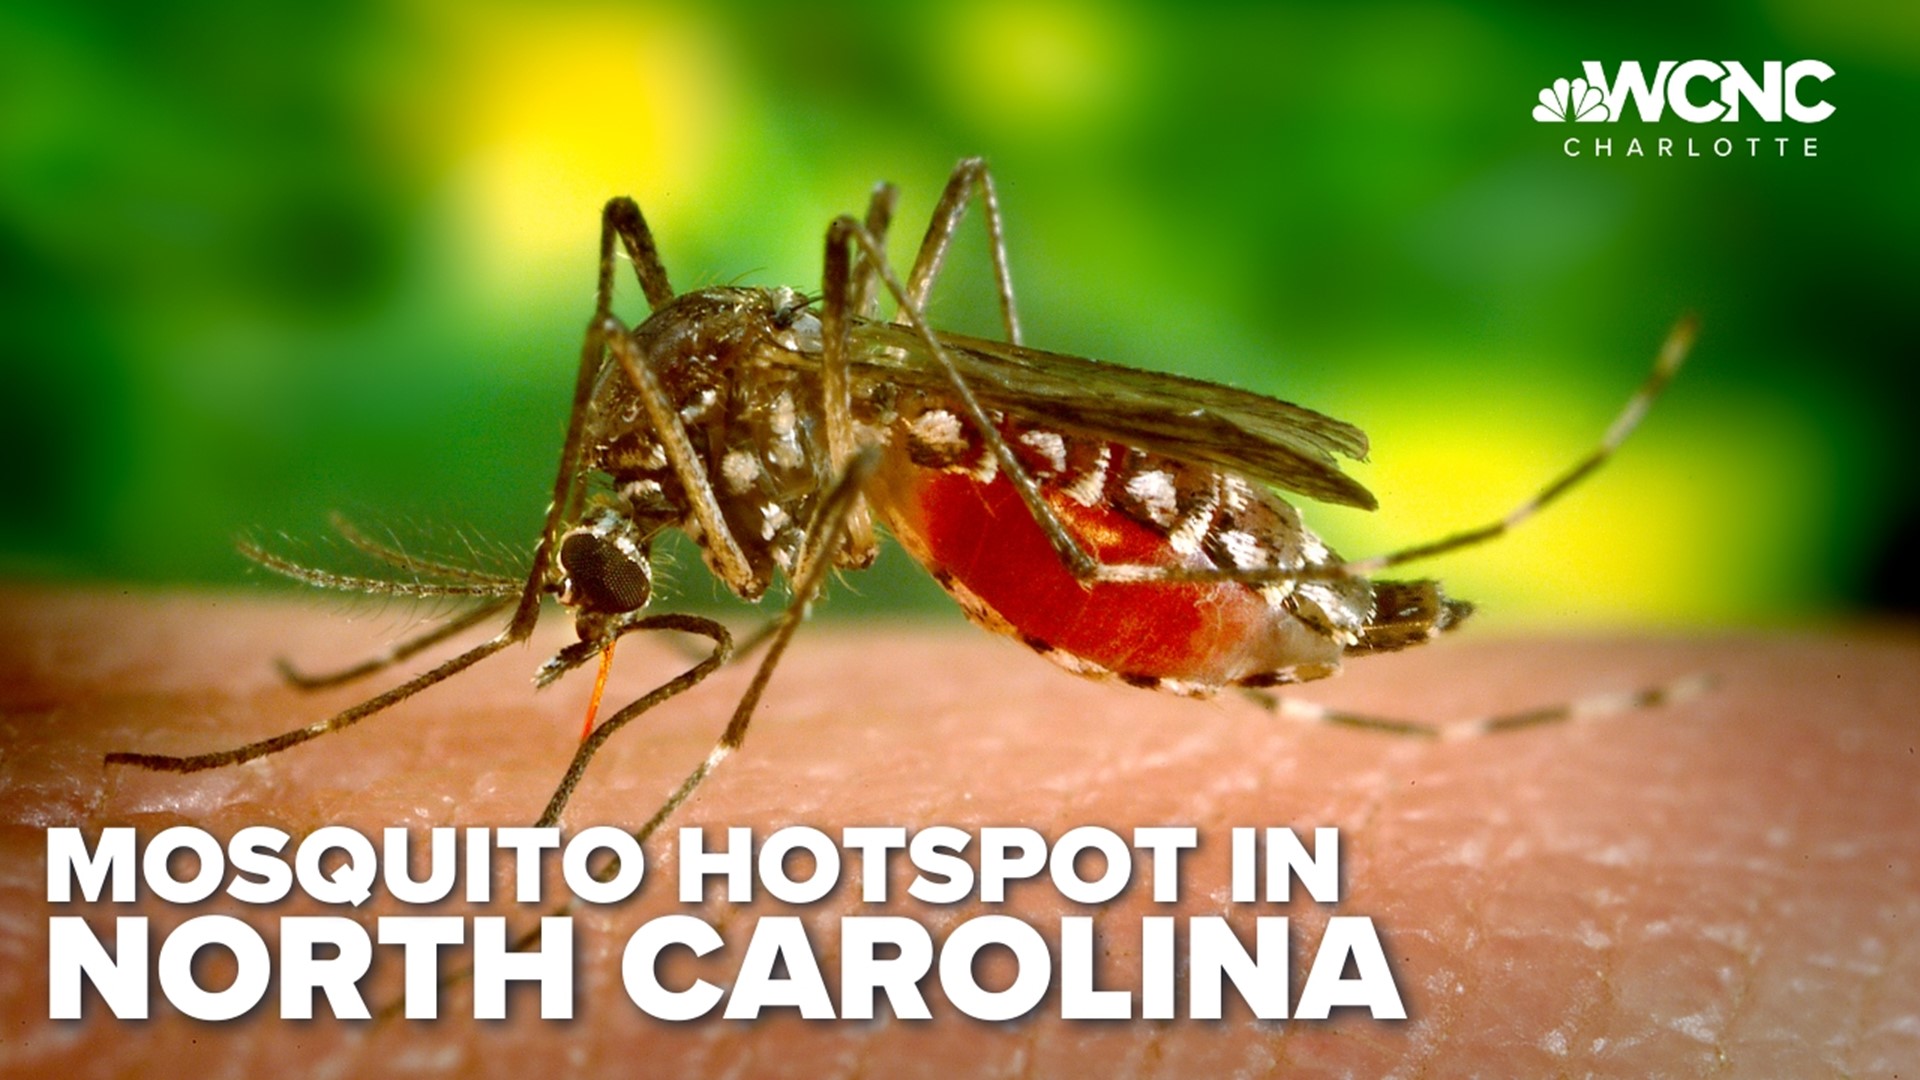 A new study shows the Carolinas are ranked among the most mosquito prone states.